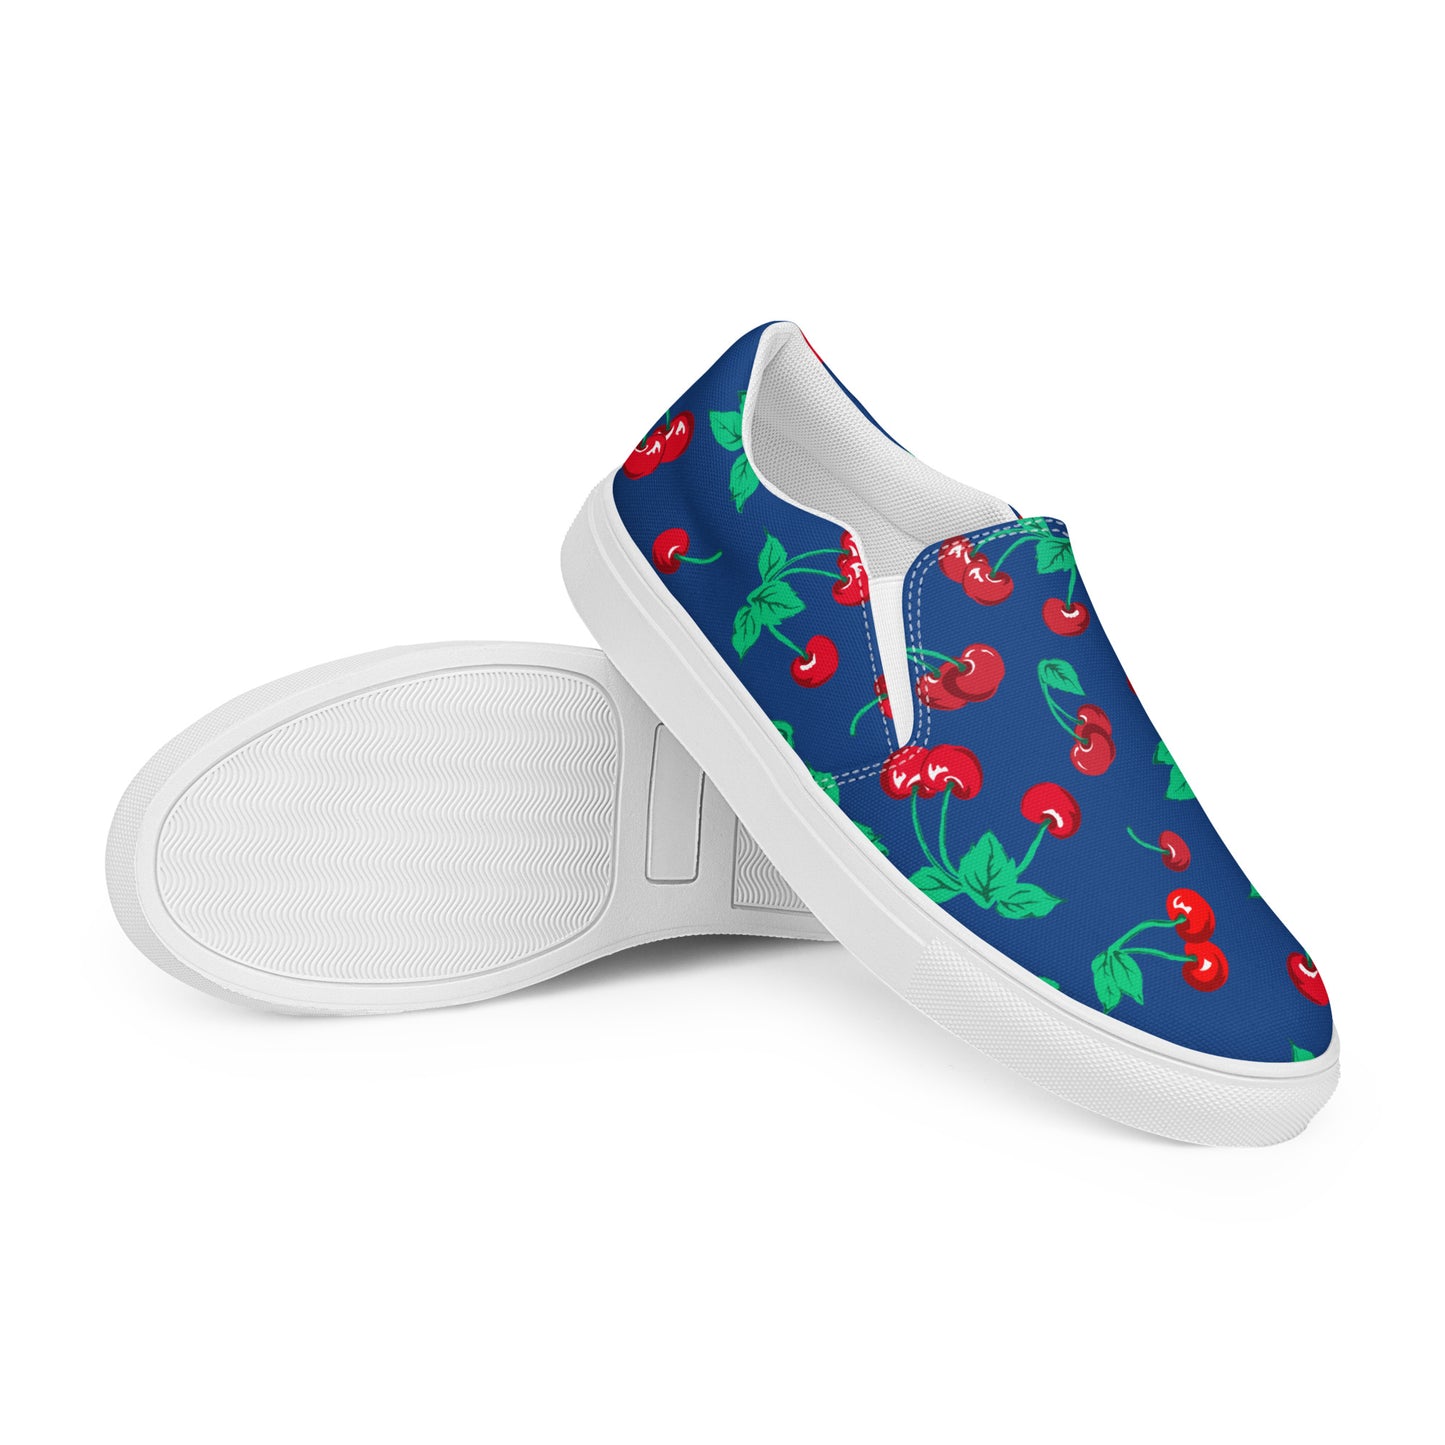 Dark Blue Cherry Girl Cherry Print Women’s Canvas Slip-On Deck Shoes | Pinup Couture Relaxed